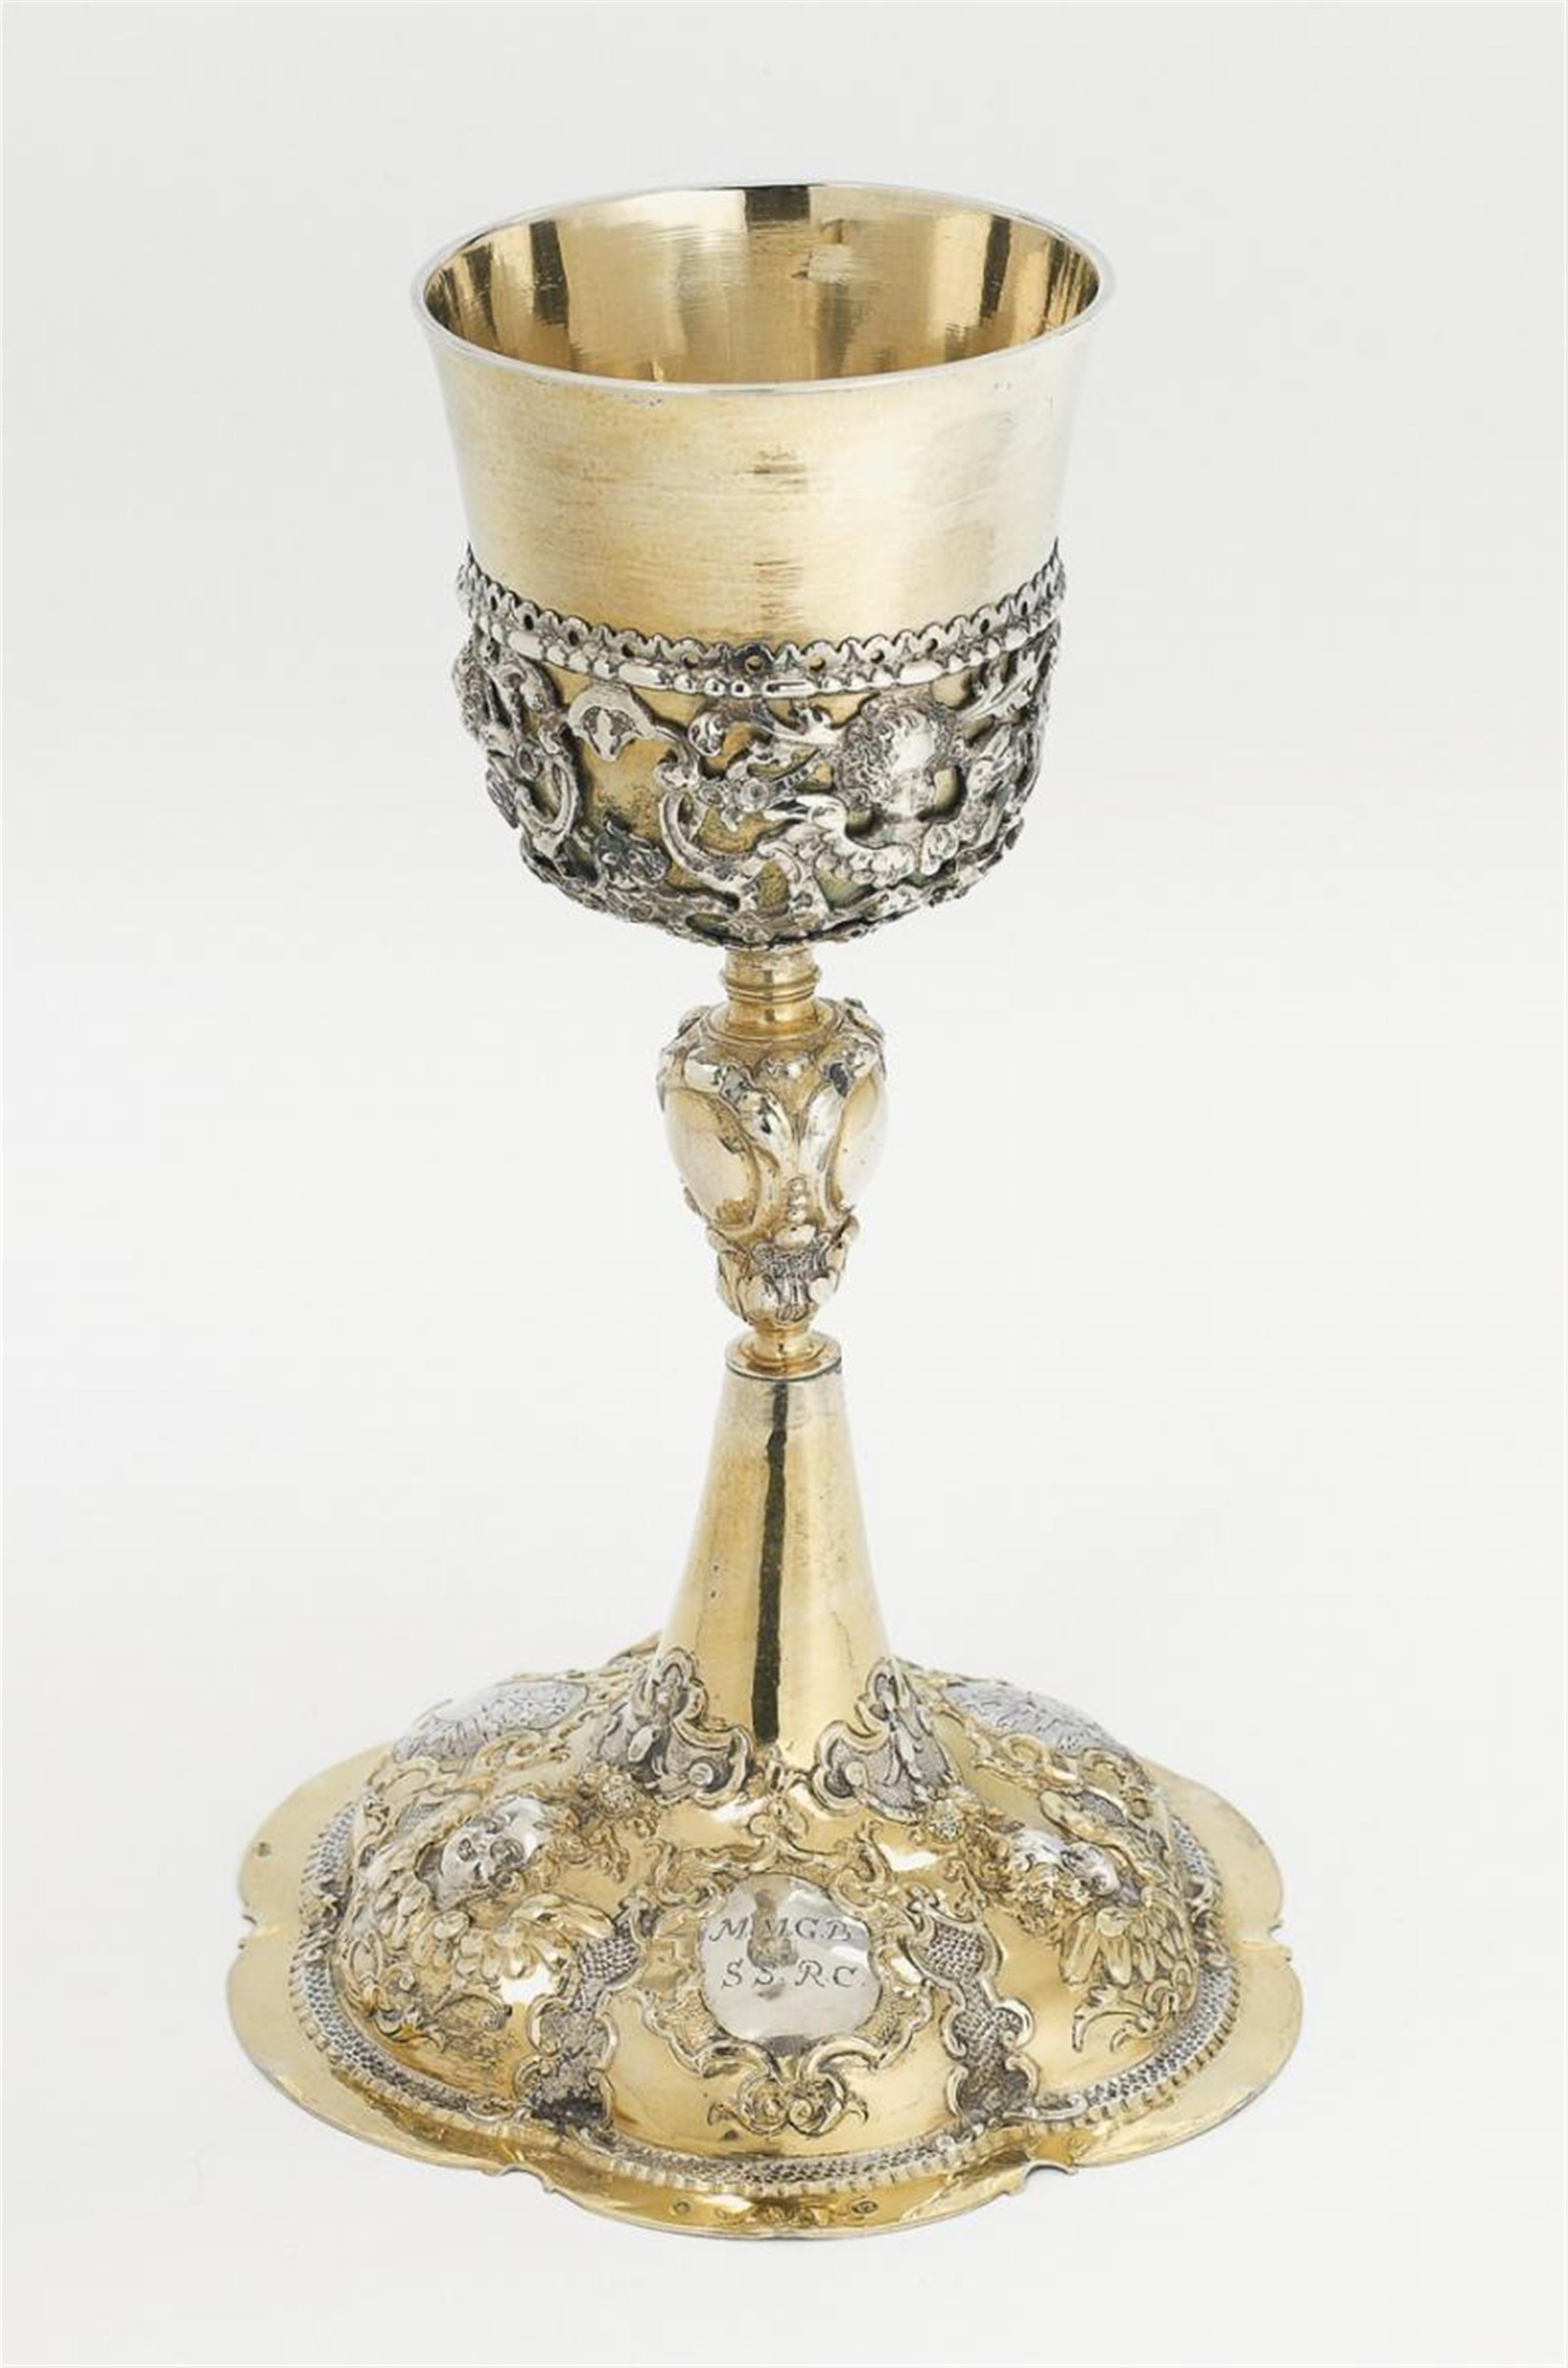 An Augsburg silver partially gilt communion chalice, monogrammed "M.M.G.B. S.S.R.C.". Marks of Johann Zeckel, 1709 - 12. Included a Viennese silver paten, 19th C. - image-1